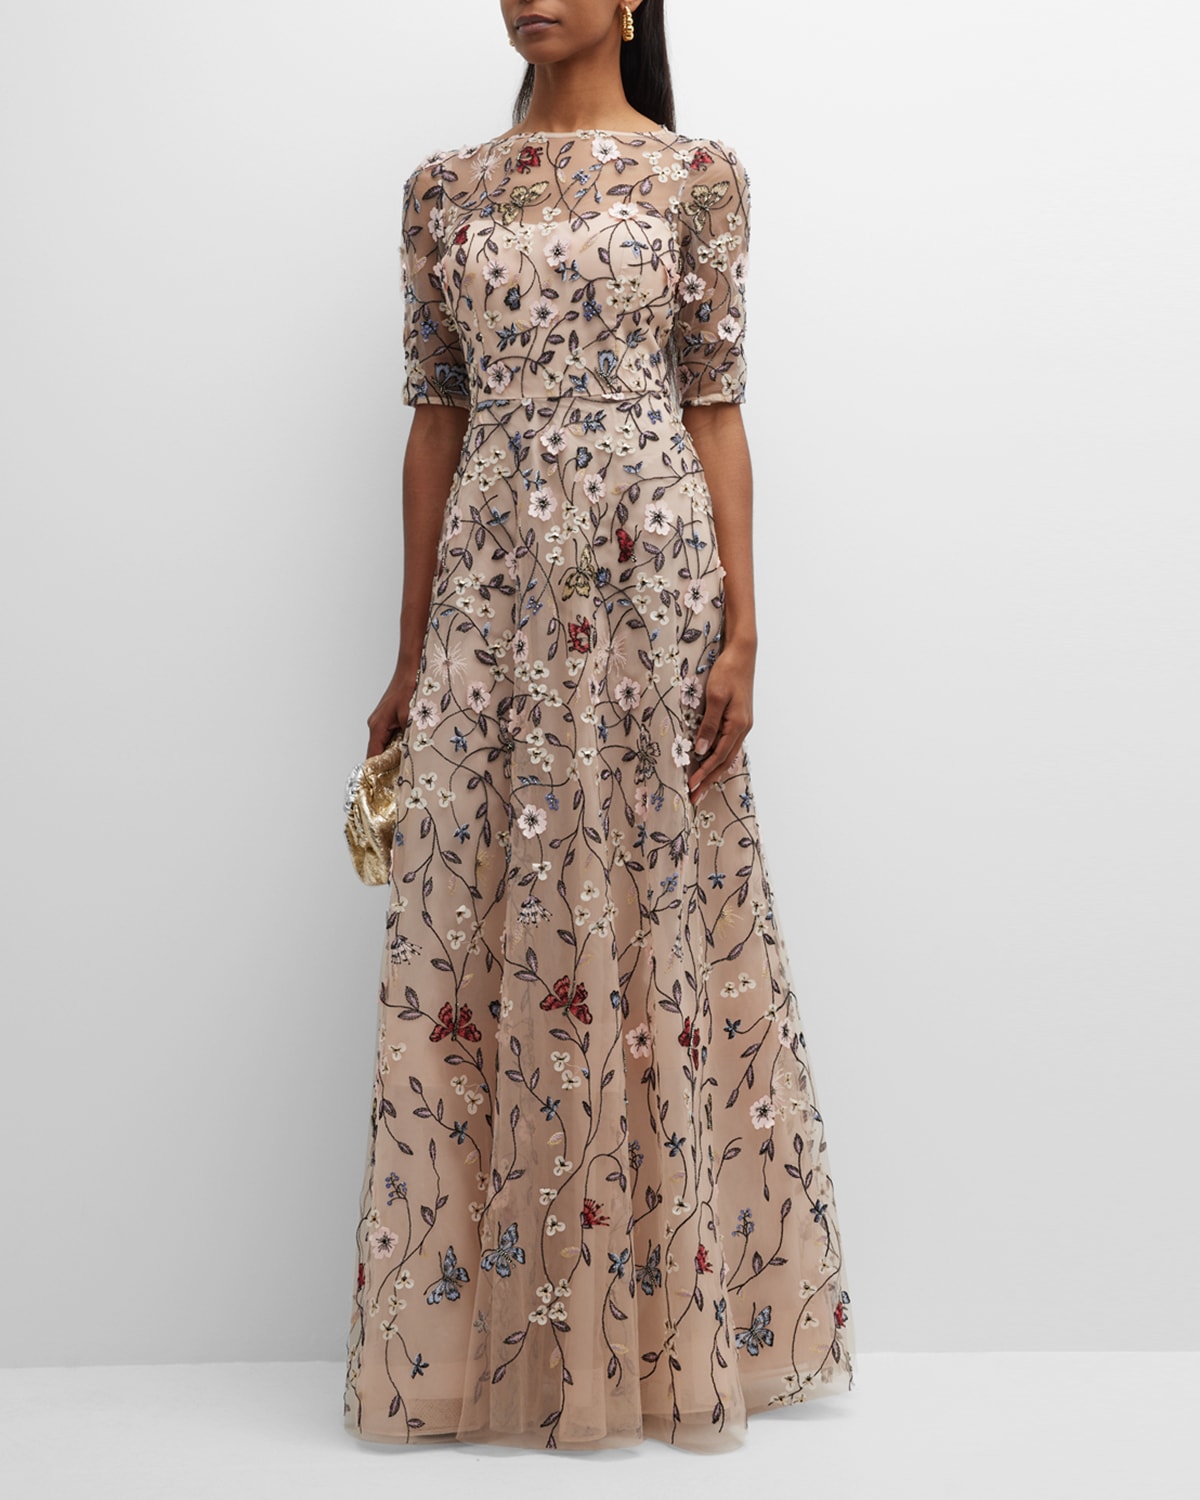 Rickie Freeman For Teri Jon Floral Vine Embroidered Tulle Illusion Gown ...